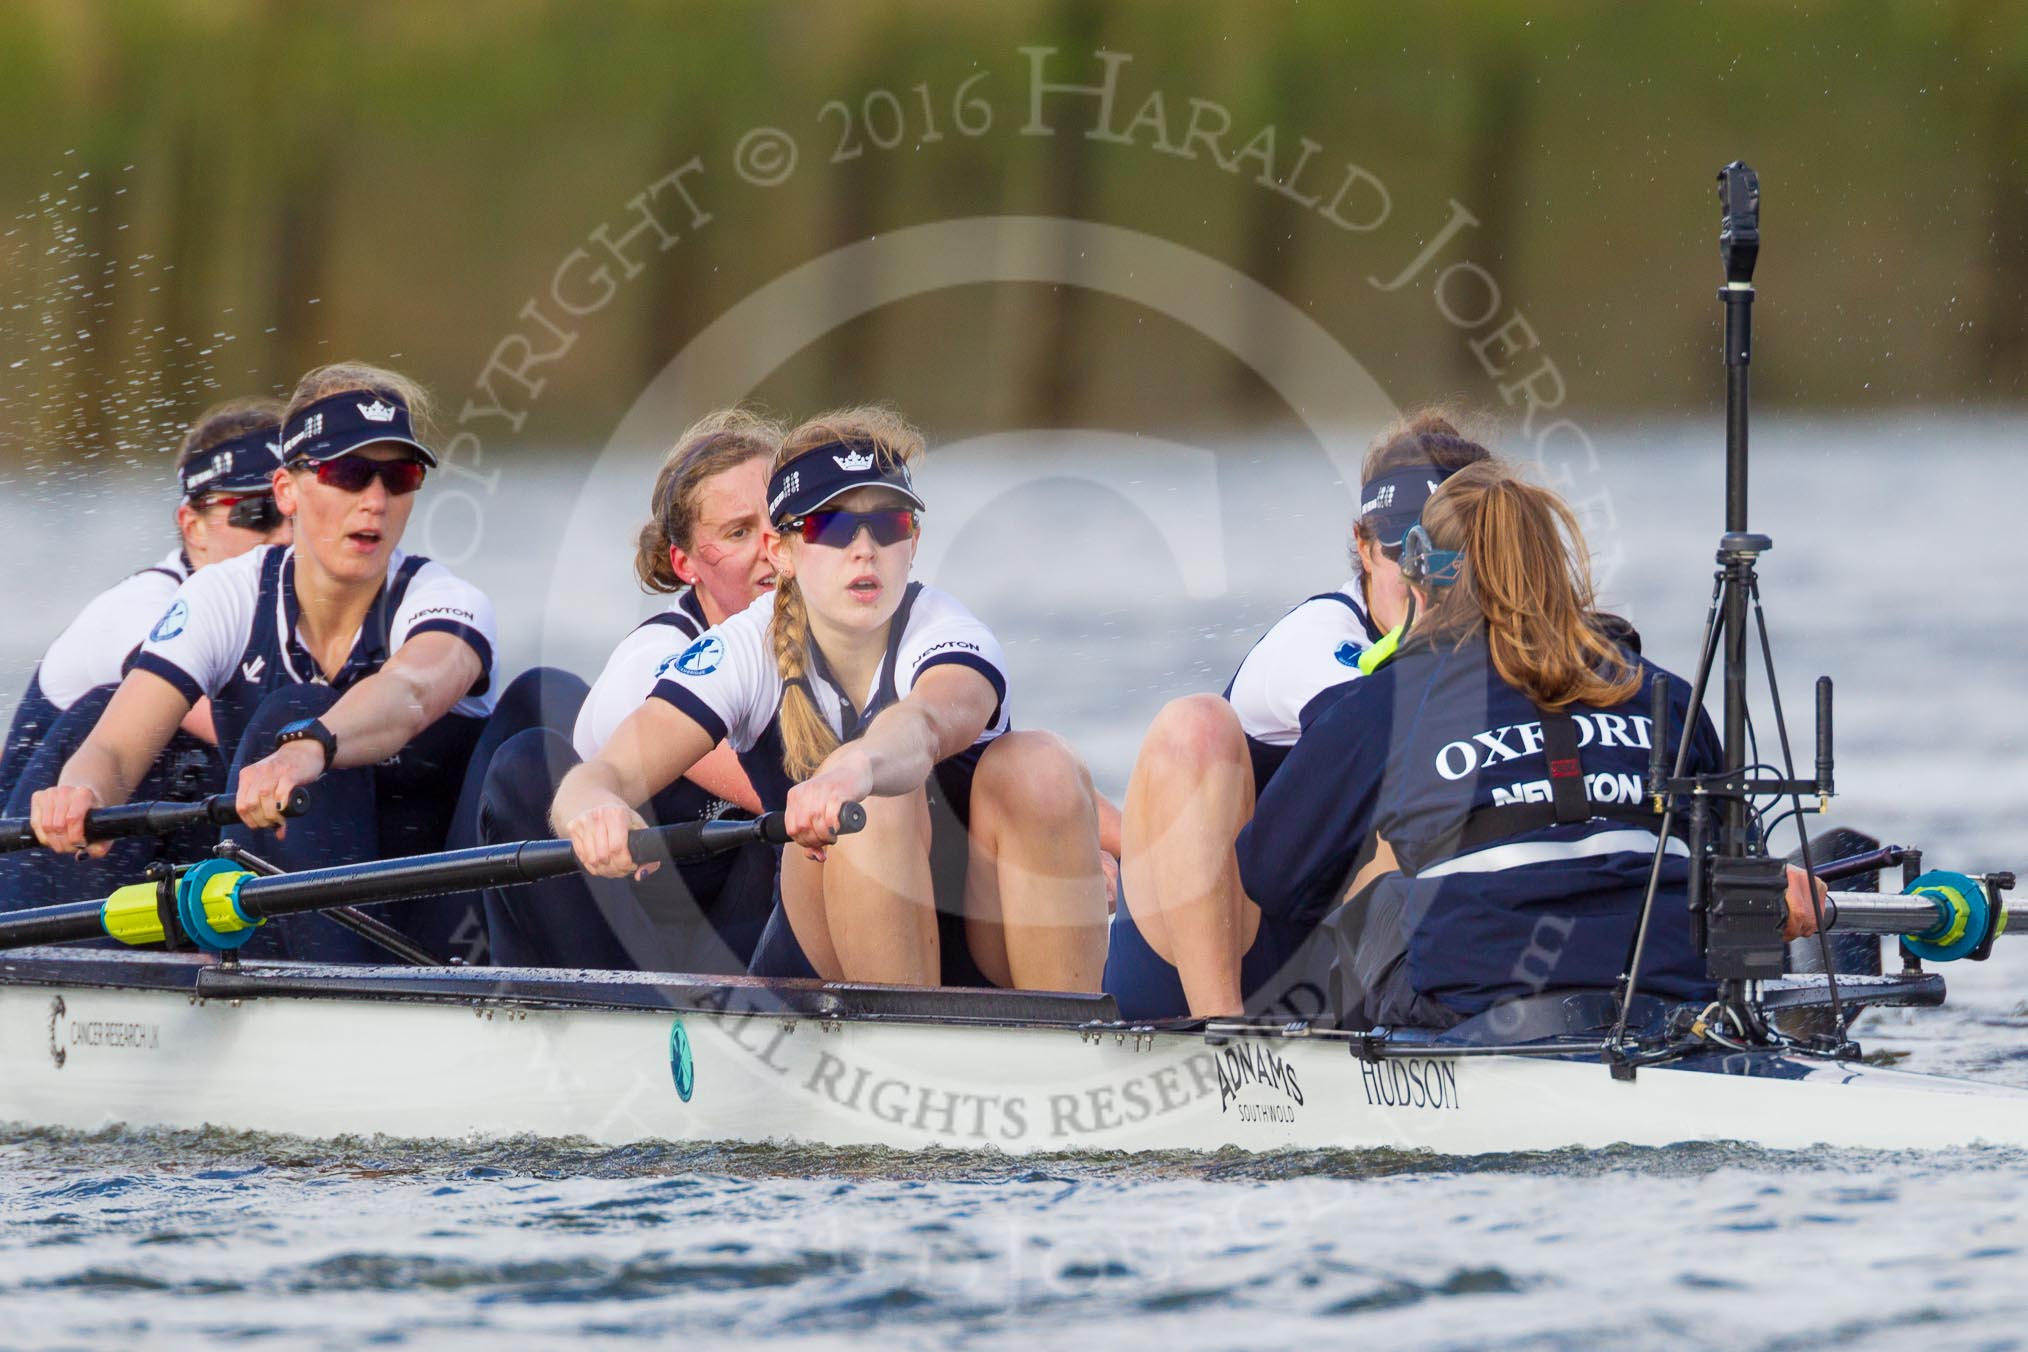 The Boat Race season 2016 -  The Cancer Research Women's Boat Race.
River Thames between Putney Bridge and Mortlake,
London SW15,

United Kingdom,
on 27 March 2016 at 14:16, image #221